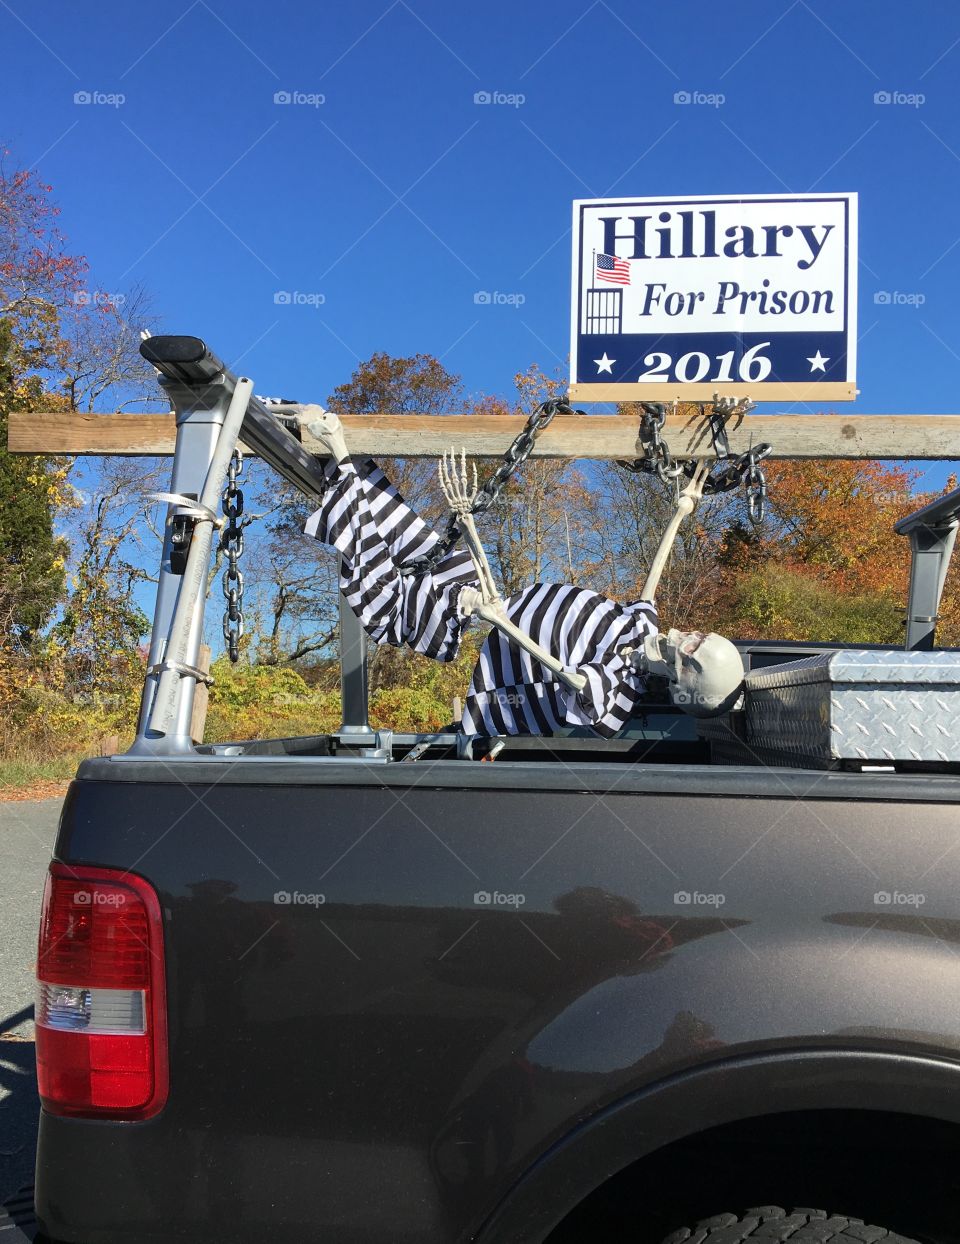 "Hilary for Prison" Sign seen on Election Day USA 🇺🇸 in Voting Parking Lot! Art, We Love It!👍